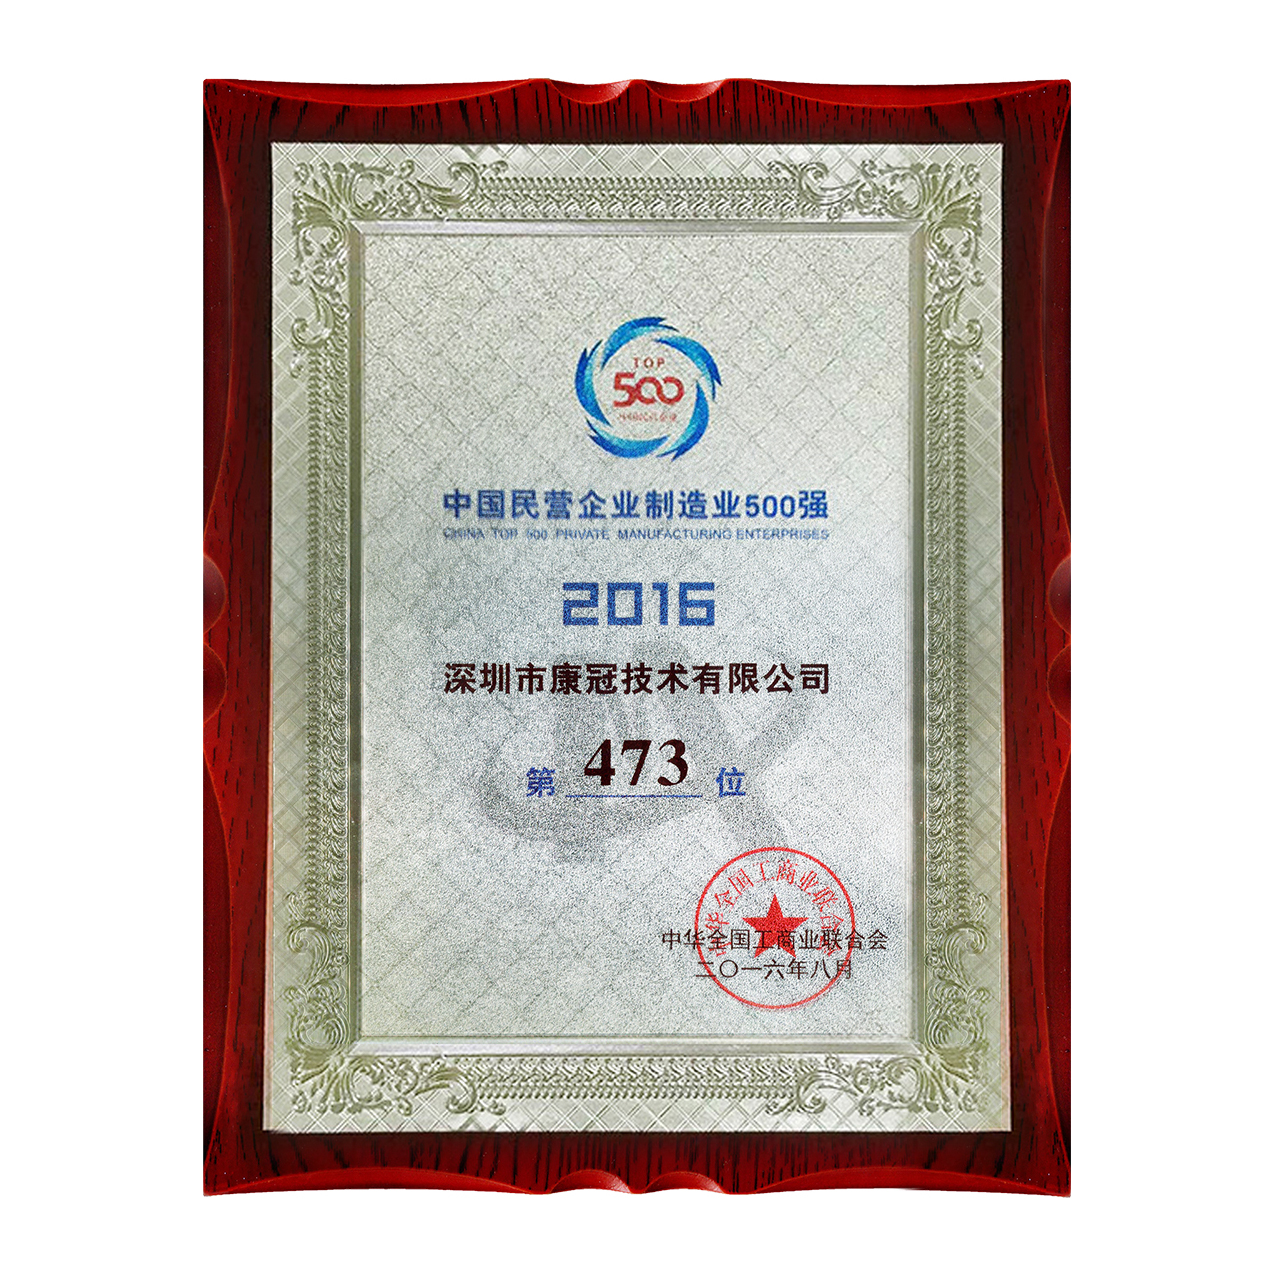 KTC won the China top 500 private manufacturing enterprises once again